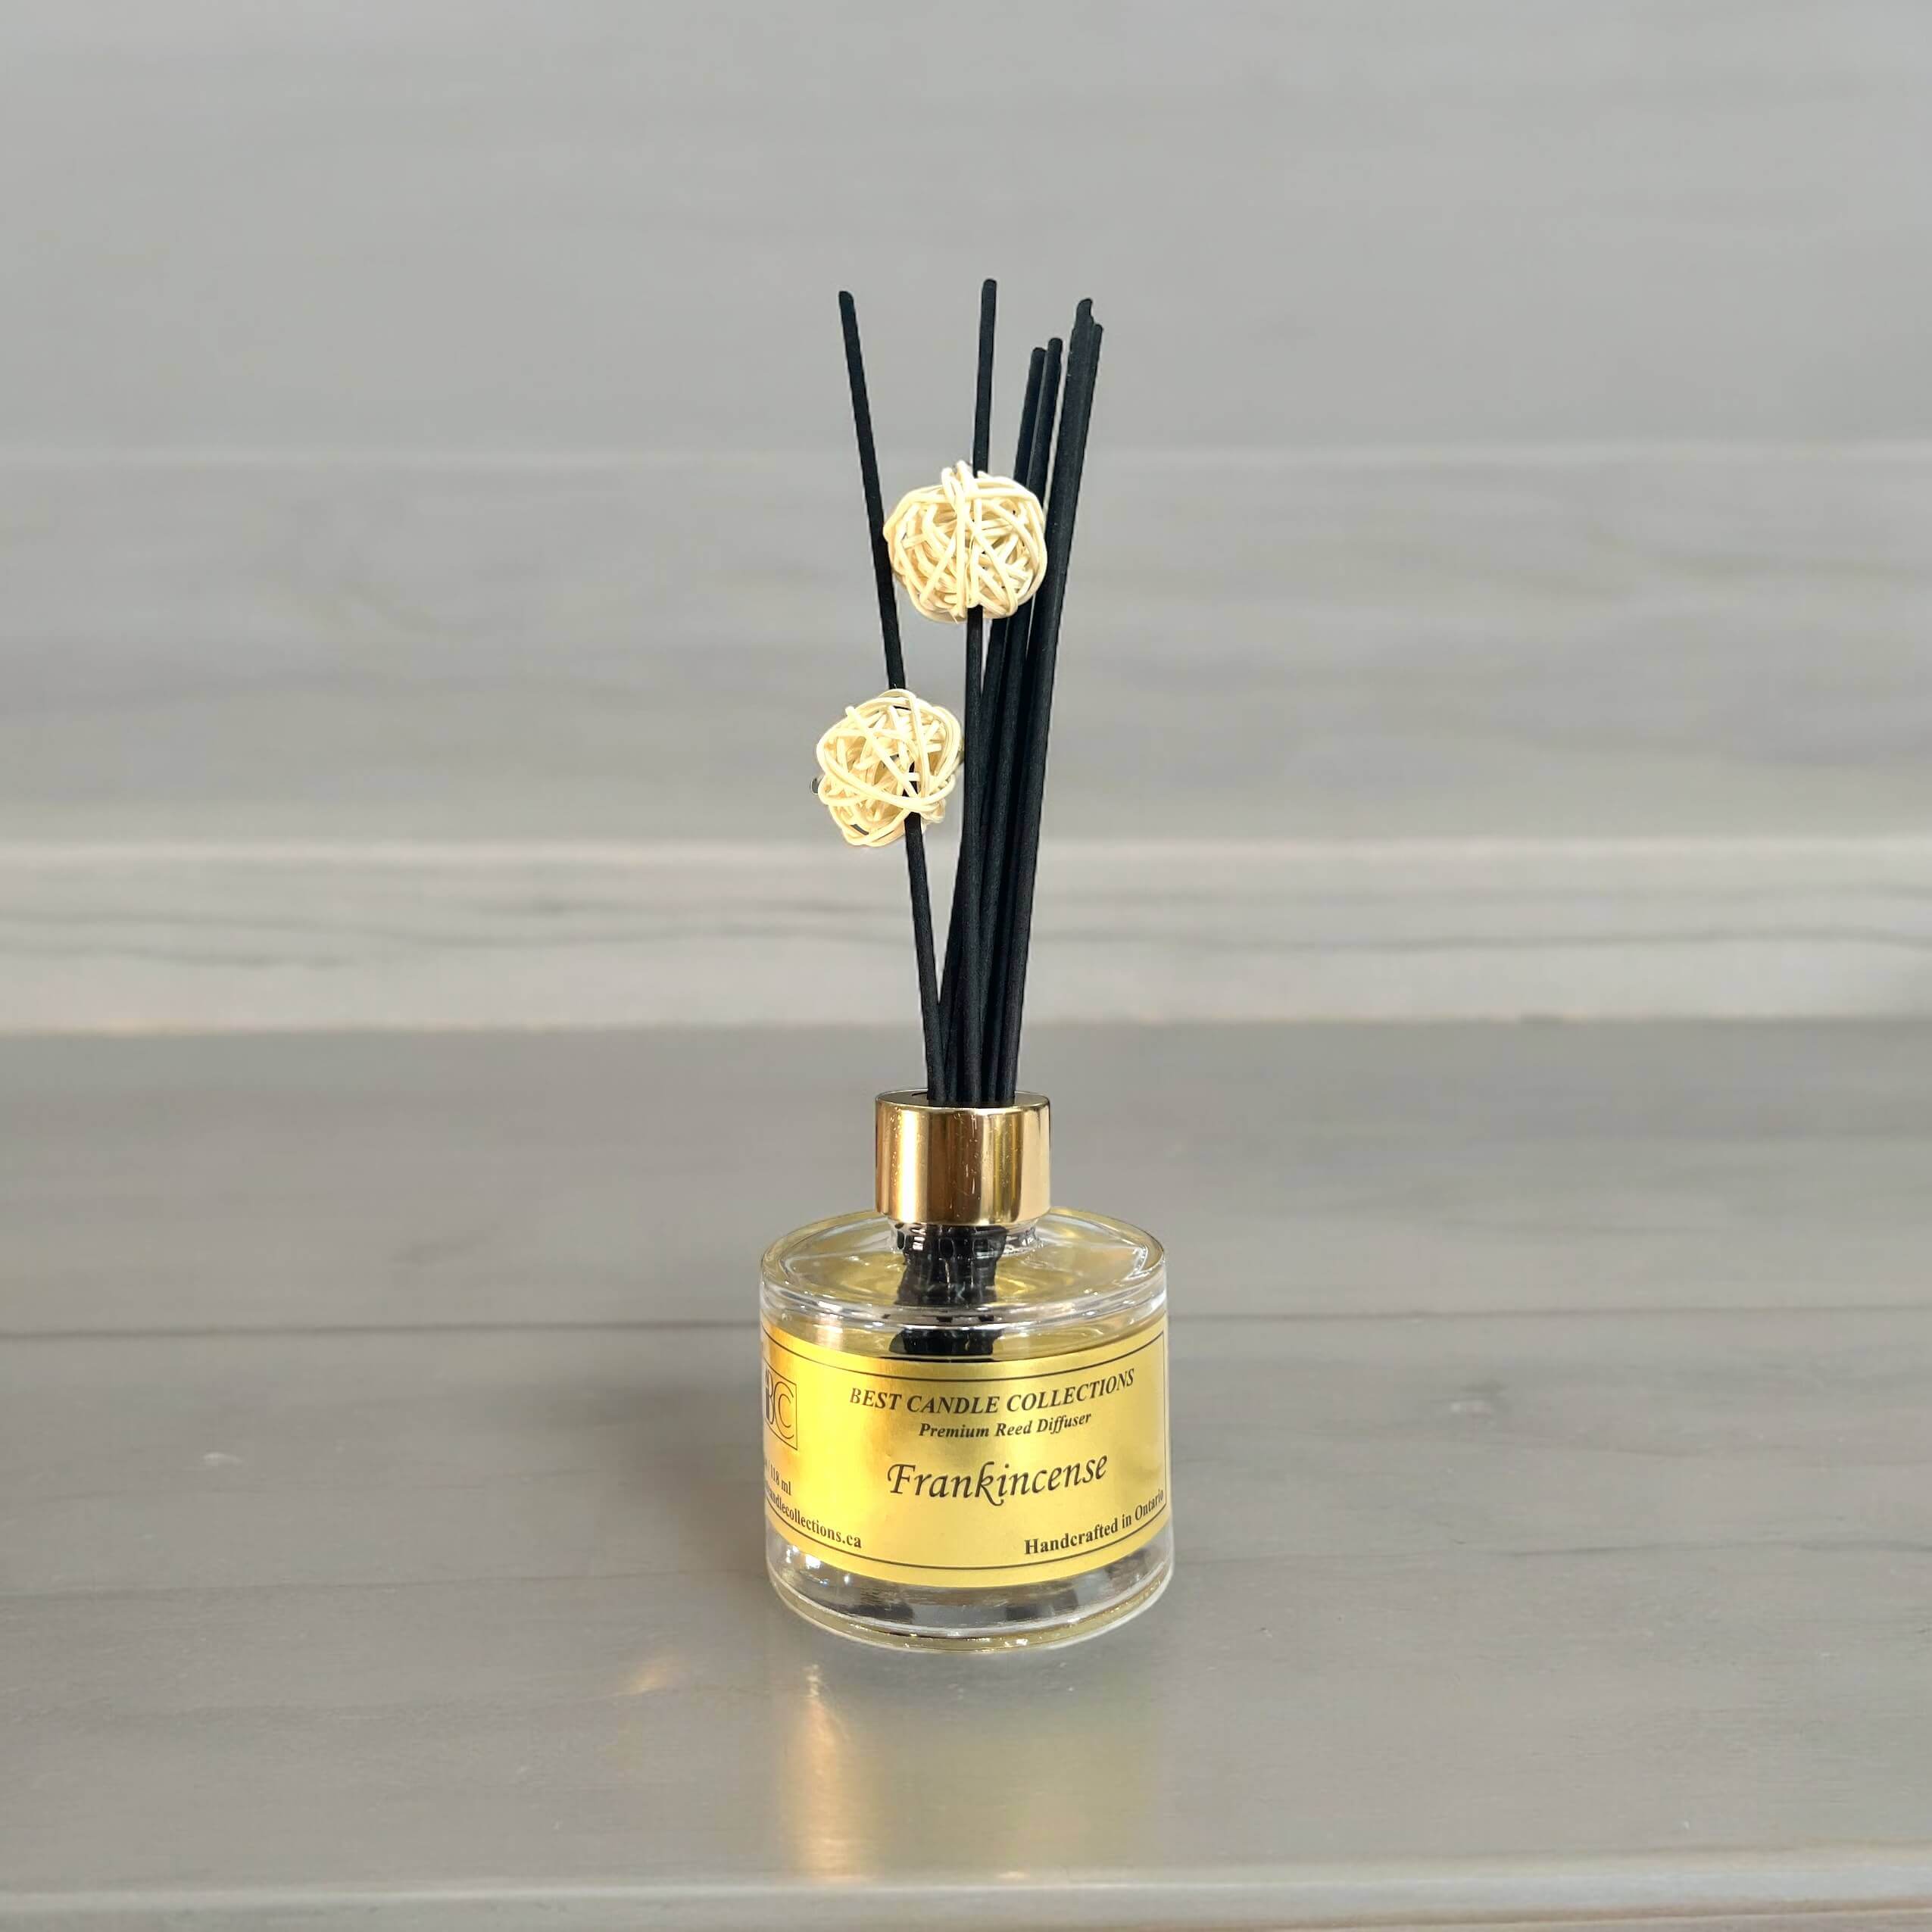 Frankincense Reed Diffuser Bottle with reeds in the bottle on a table